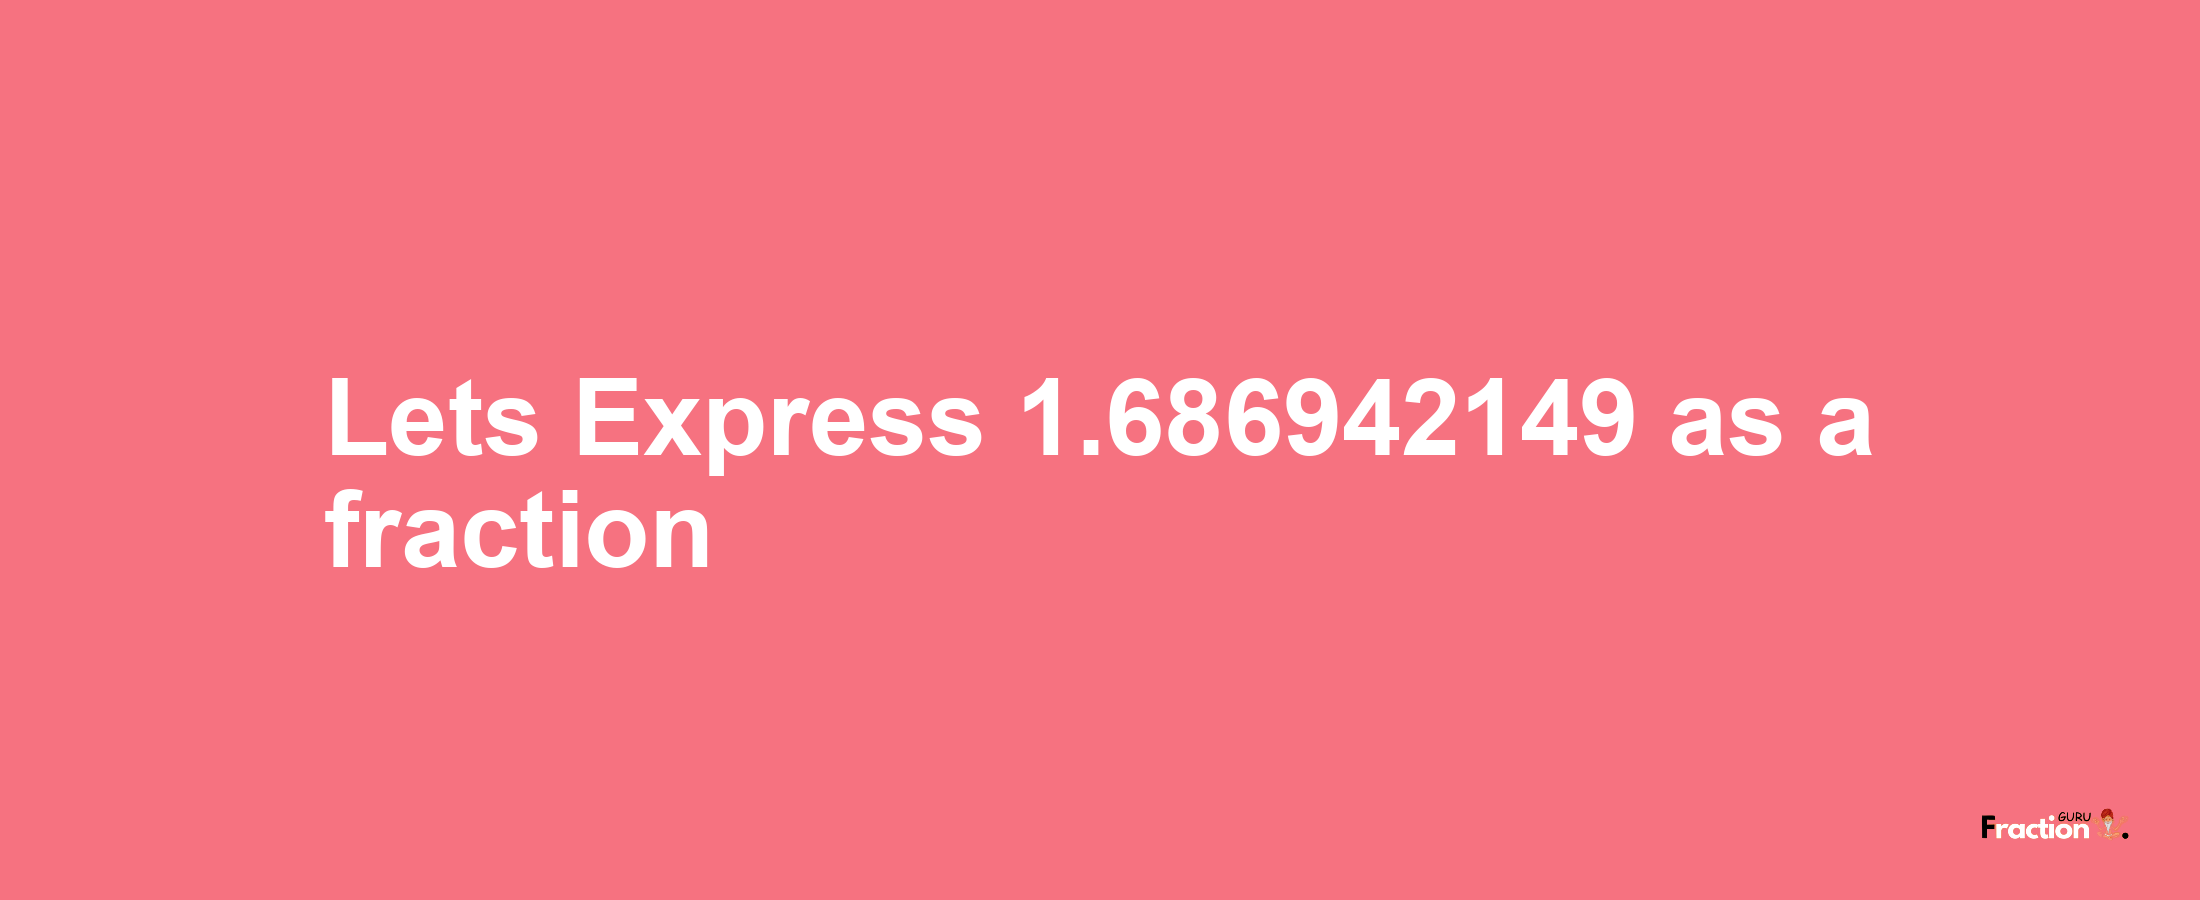 Lets Express 1.686942149 as afraction